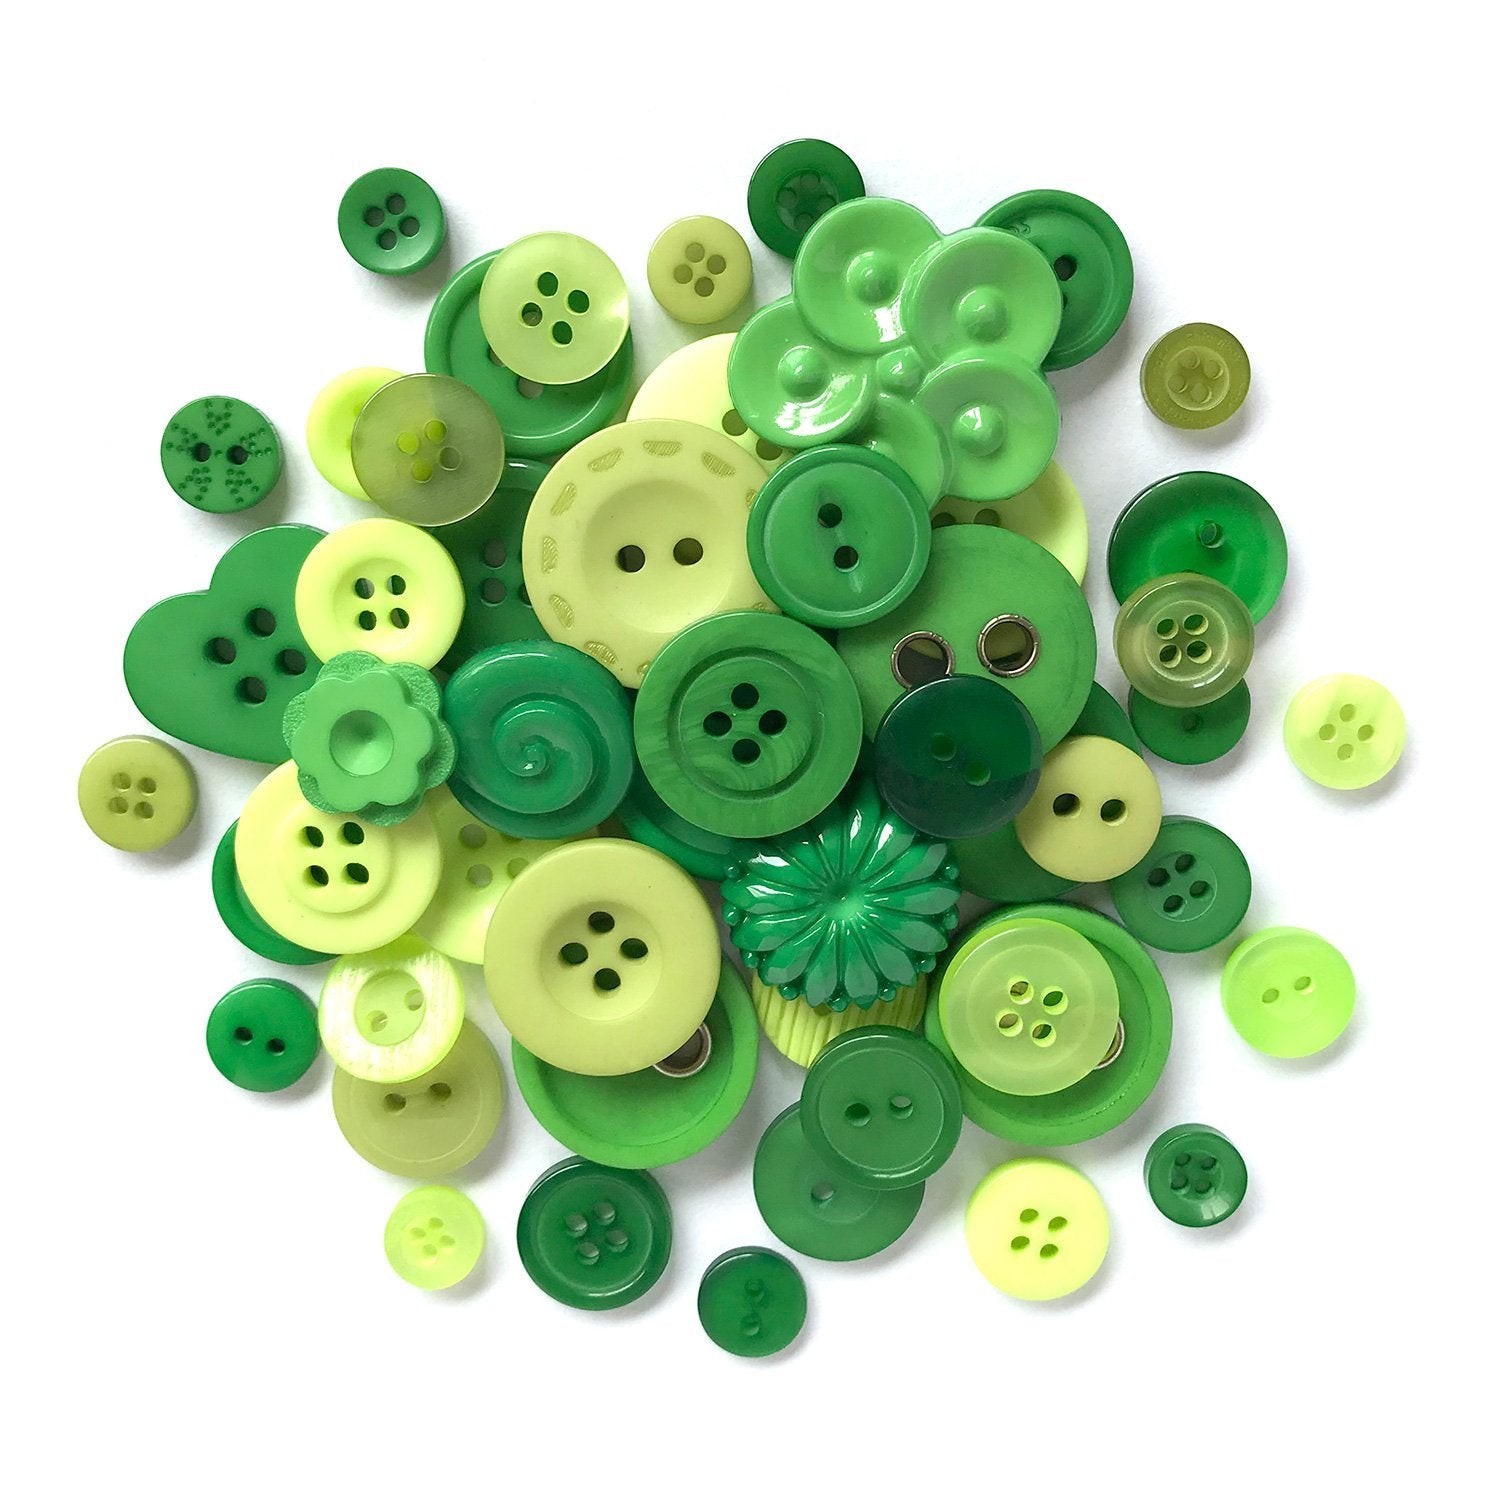 Green - HAB100 - Buttons Galore and More